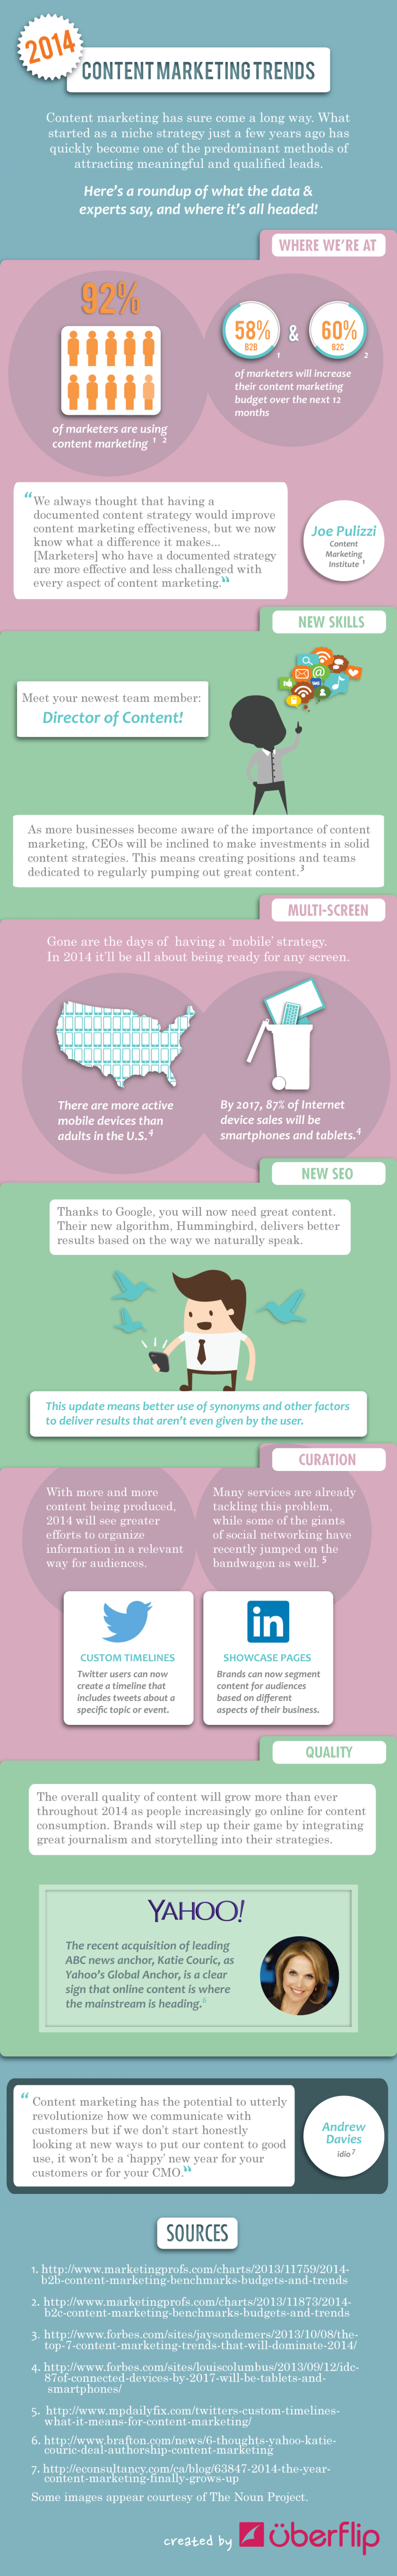 Content Marketing Trends For 2014 Infographic